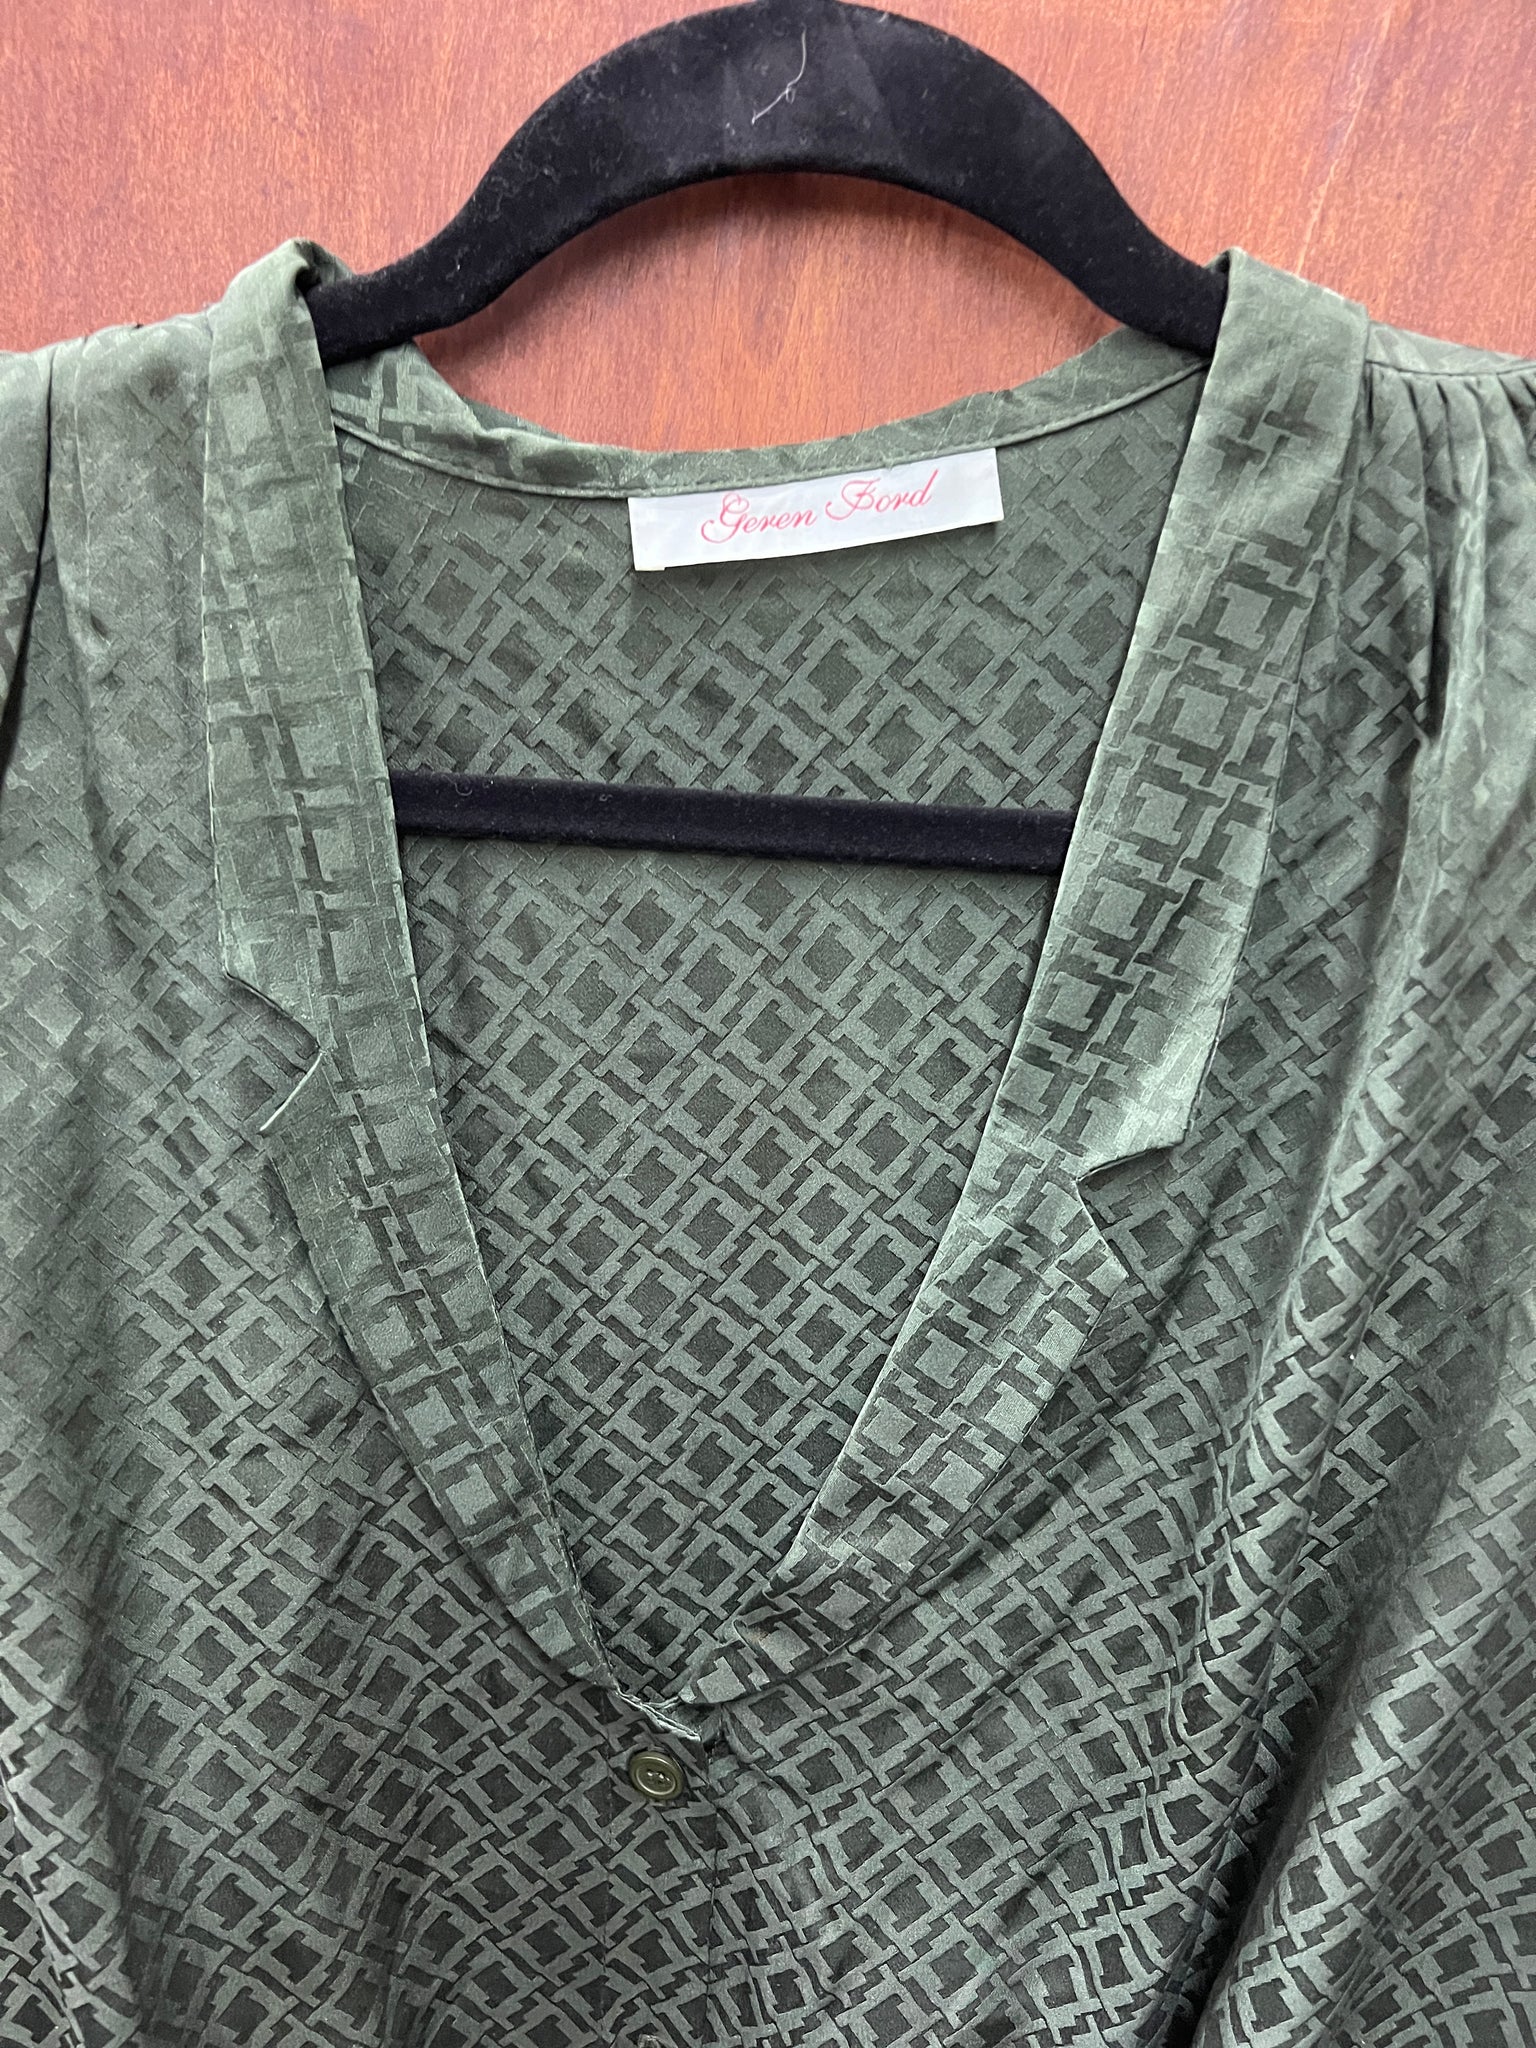 1990s+ TOPS- Geren Ford forest green silk jacquard l/s